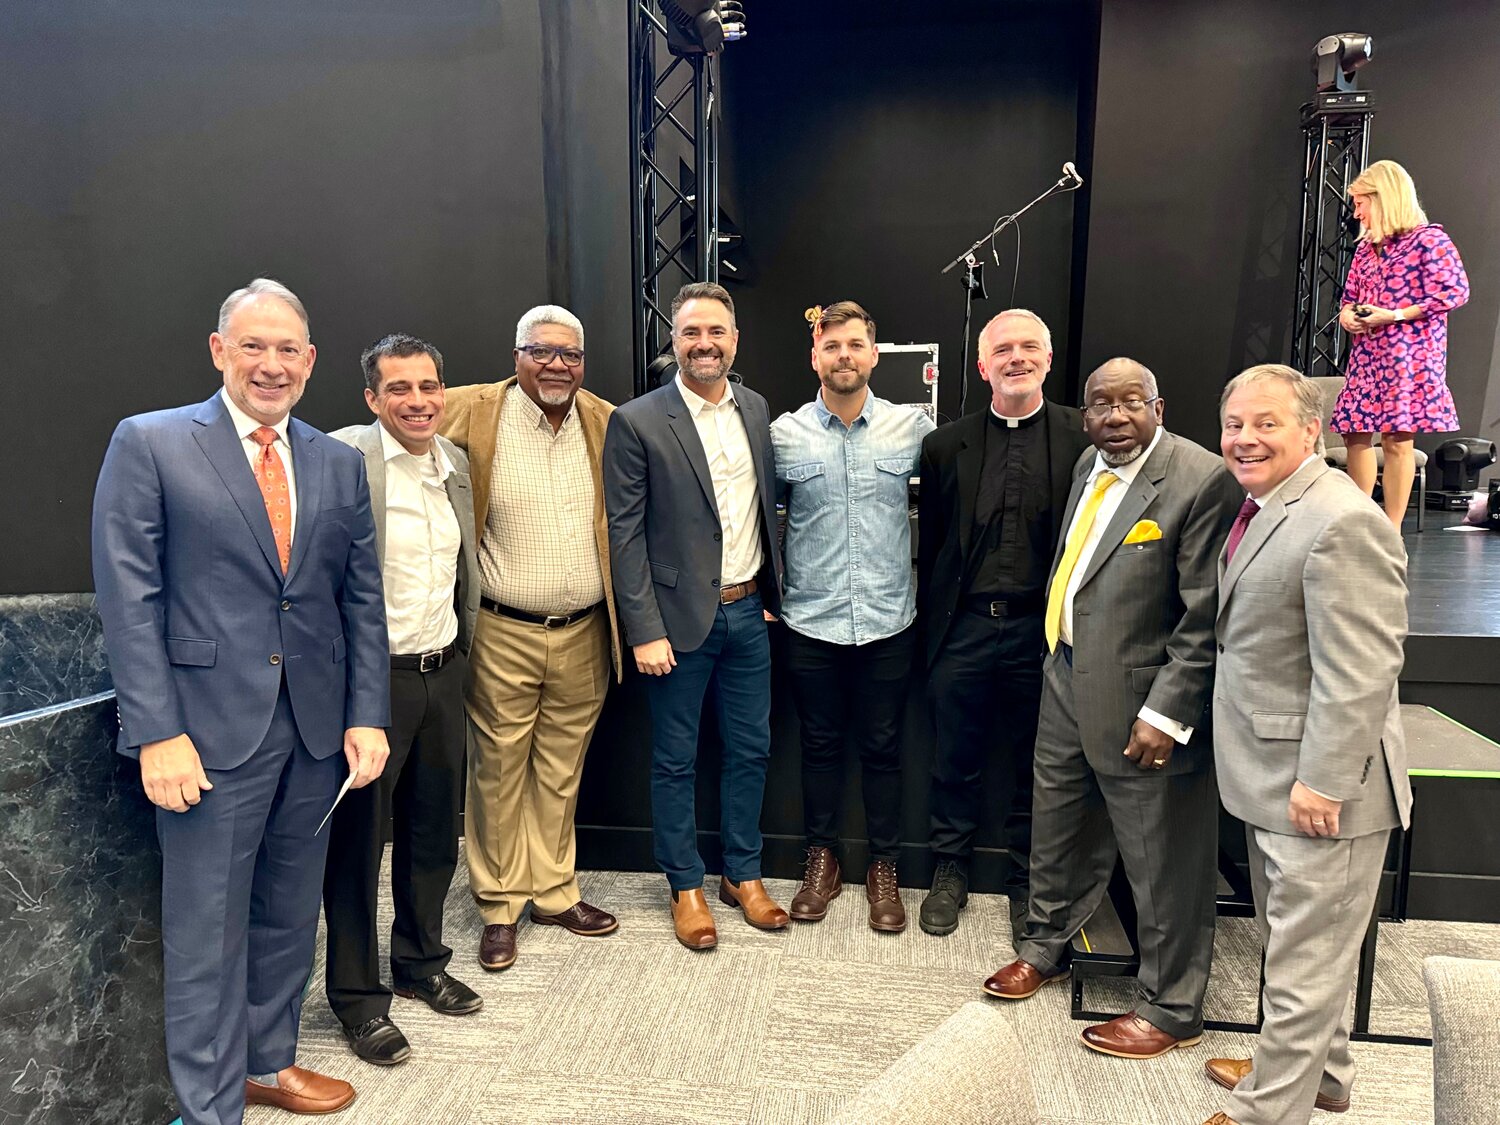 Pictured, from left, are Mayor Bubba Morrison, City of Gluckstadt; Dr. Greg Hawkins, Hope Hollow Ministries, Pastor Keith Gayden, Mt. Pleasant Baptist Church, Pastor Jason Smith, Pinelake; Pastor Nathan Hughes, Vertical Church; Father Matthew Simmons, St. Joseph Catholic Church; Pastor Steven Brooks, Fairview Baptist Church and Dr. Kevin Cooper, Grace Crossing Baptist Church.